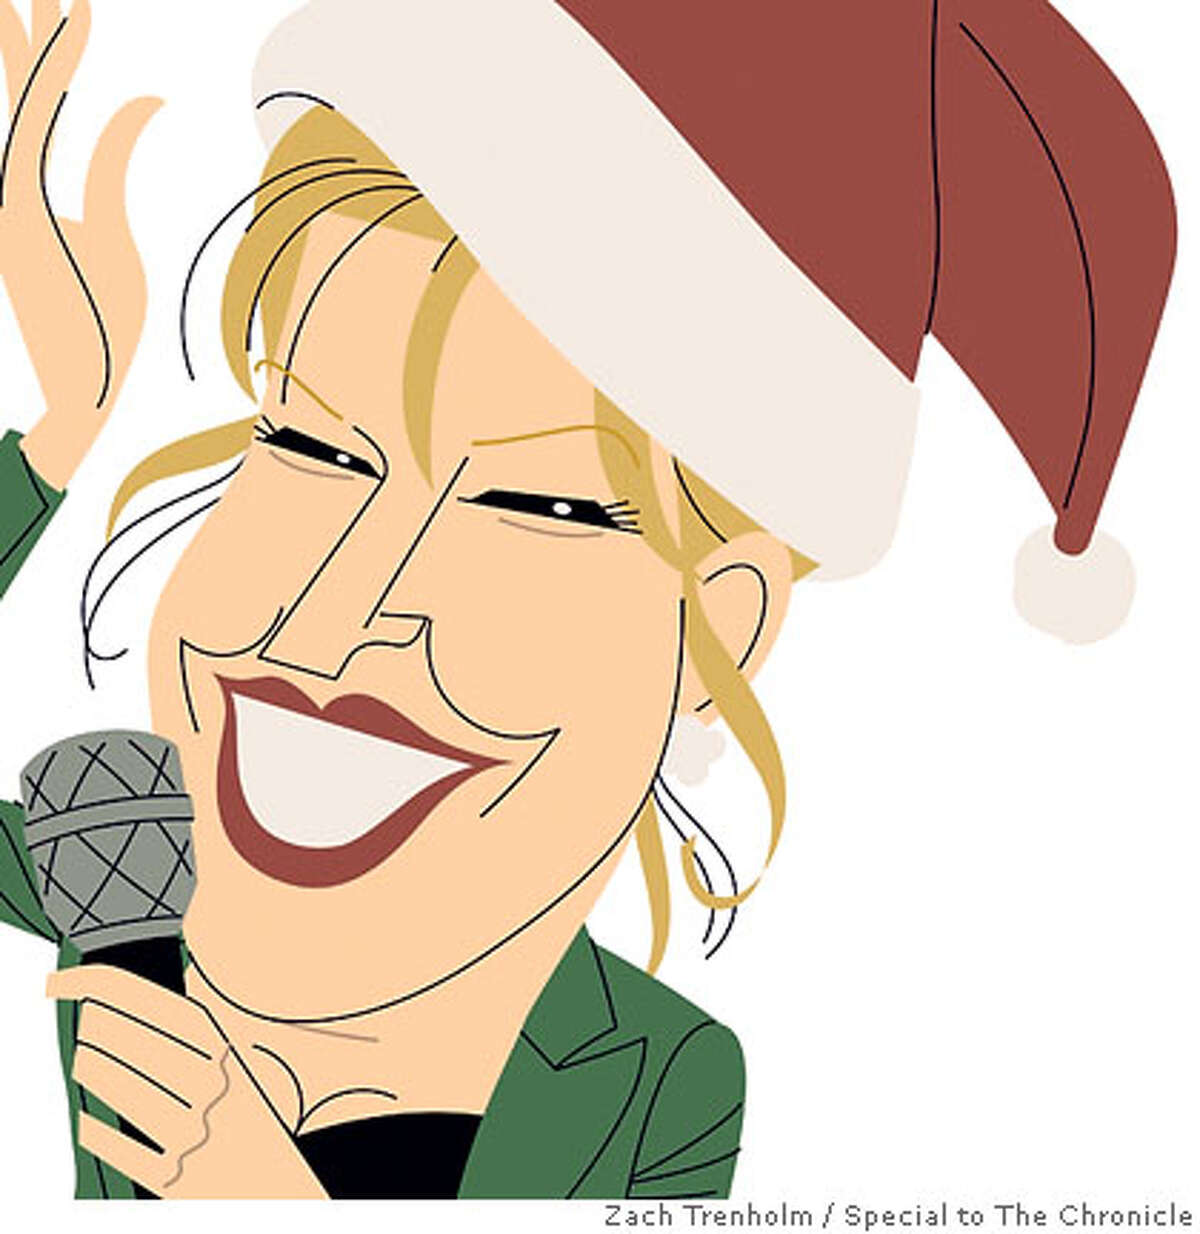 Got a Christmas CD? Bette Midler (shown), Bing Crosby, Brian Setzer, Jessica Simpson and Paul McCartney do. Illustration by Zach Trenholm, special to the Chronicle